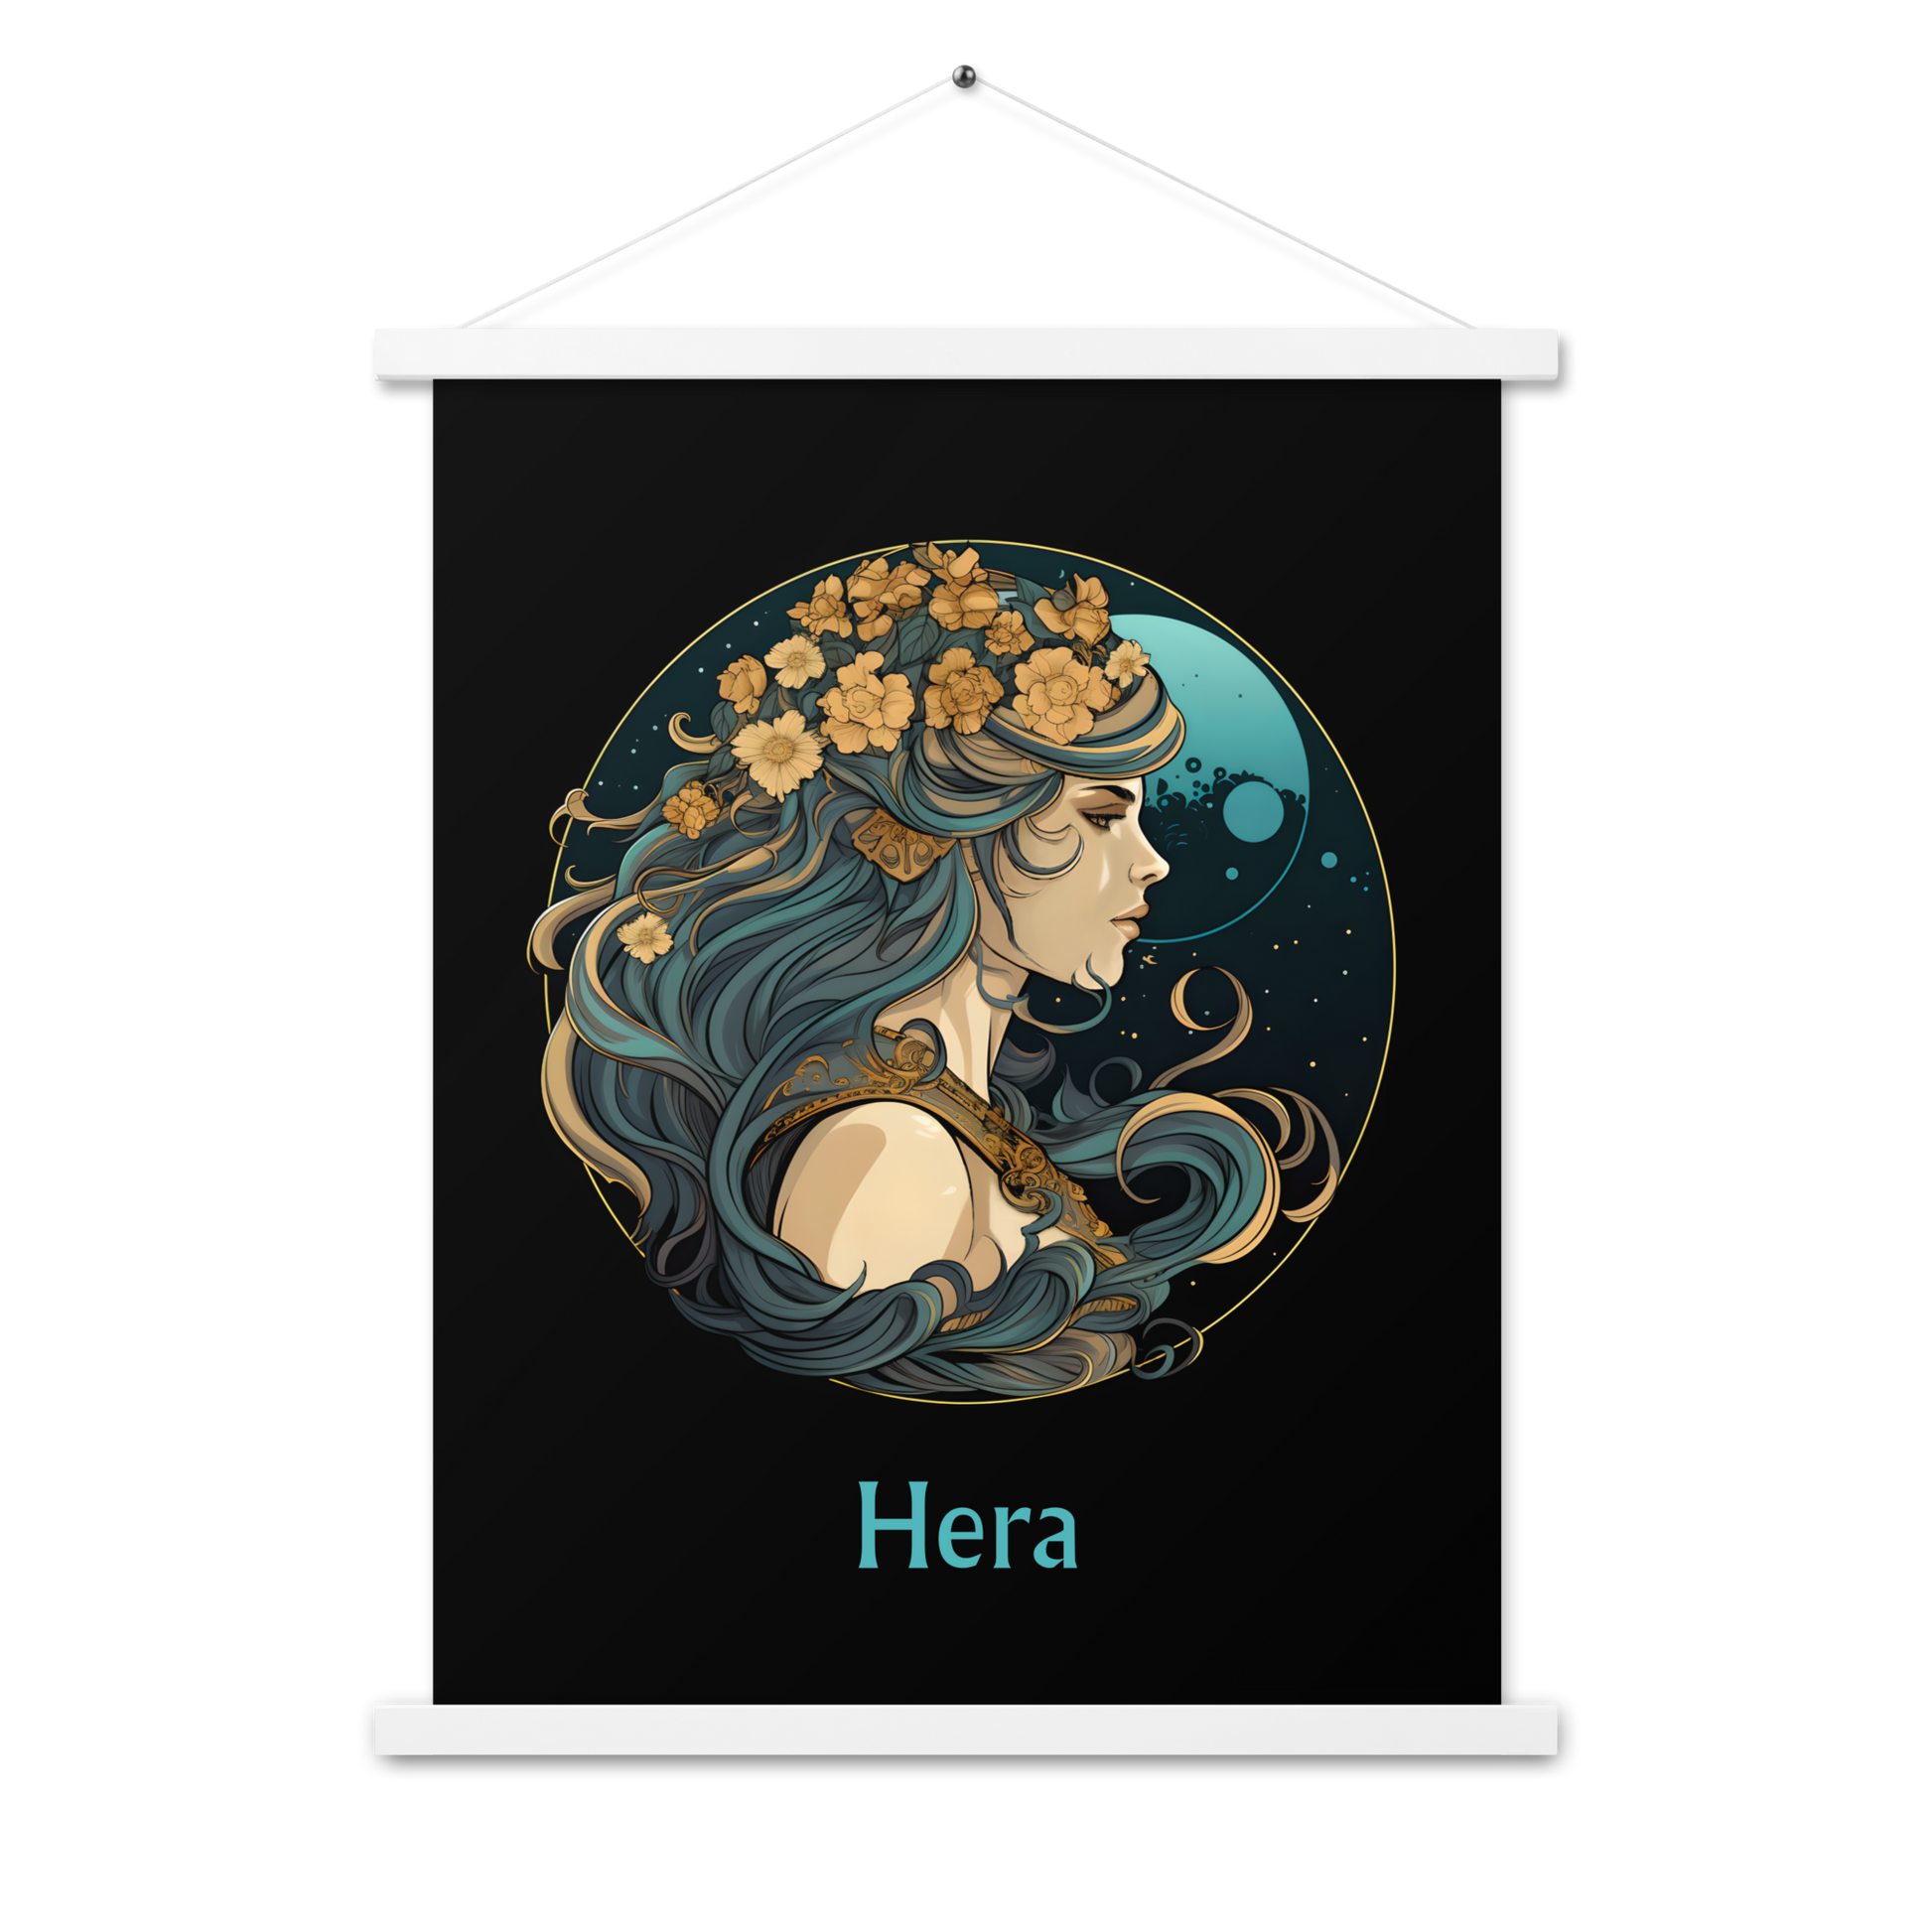 Hera's Devotion - Colorful Hanging Wall Art High Quality Matte Poster DrawDadDraw